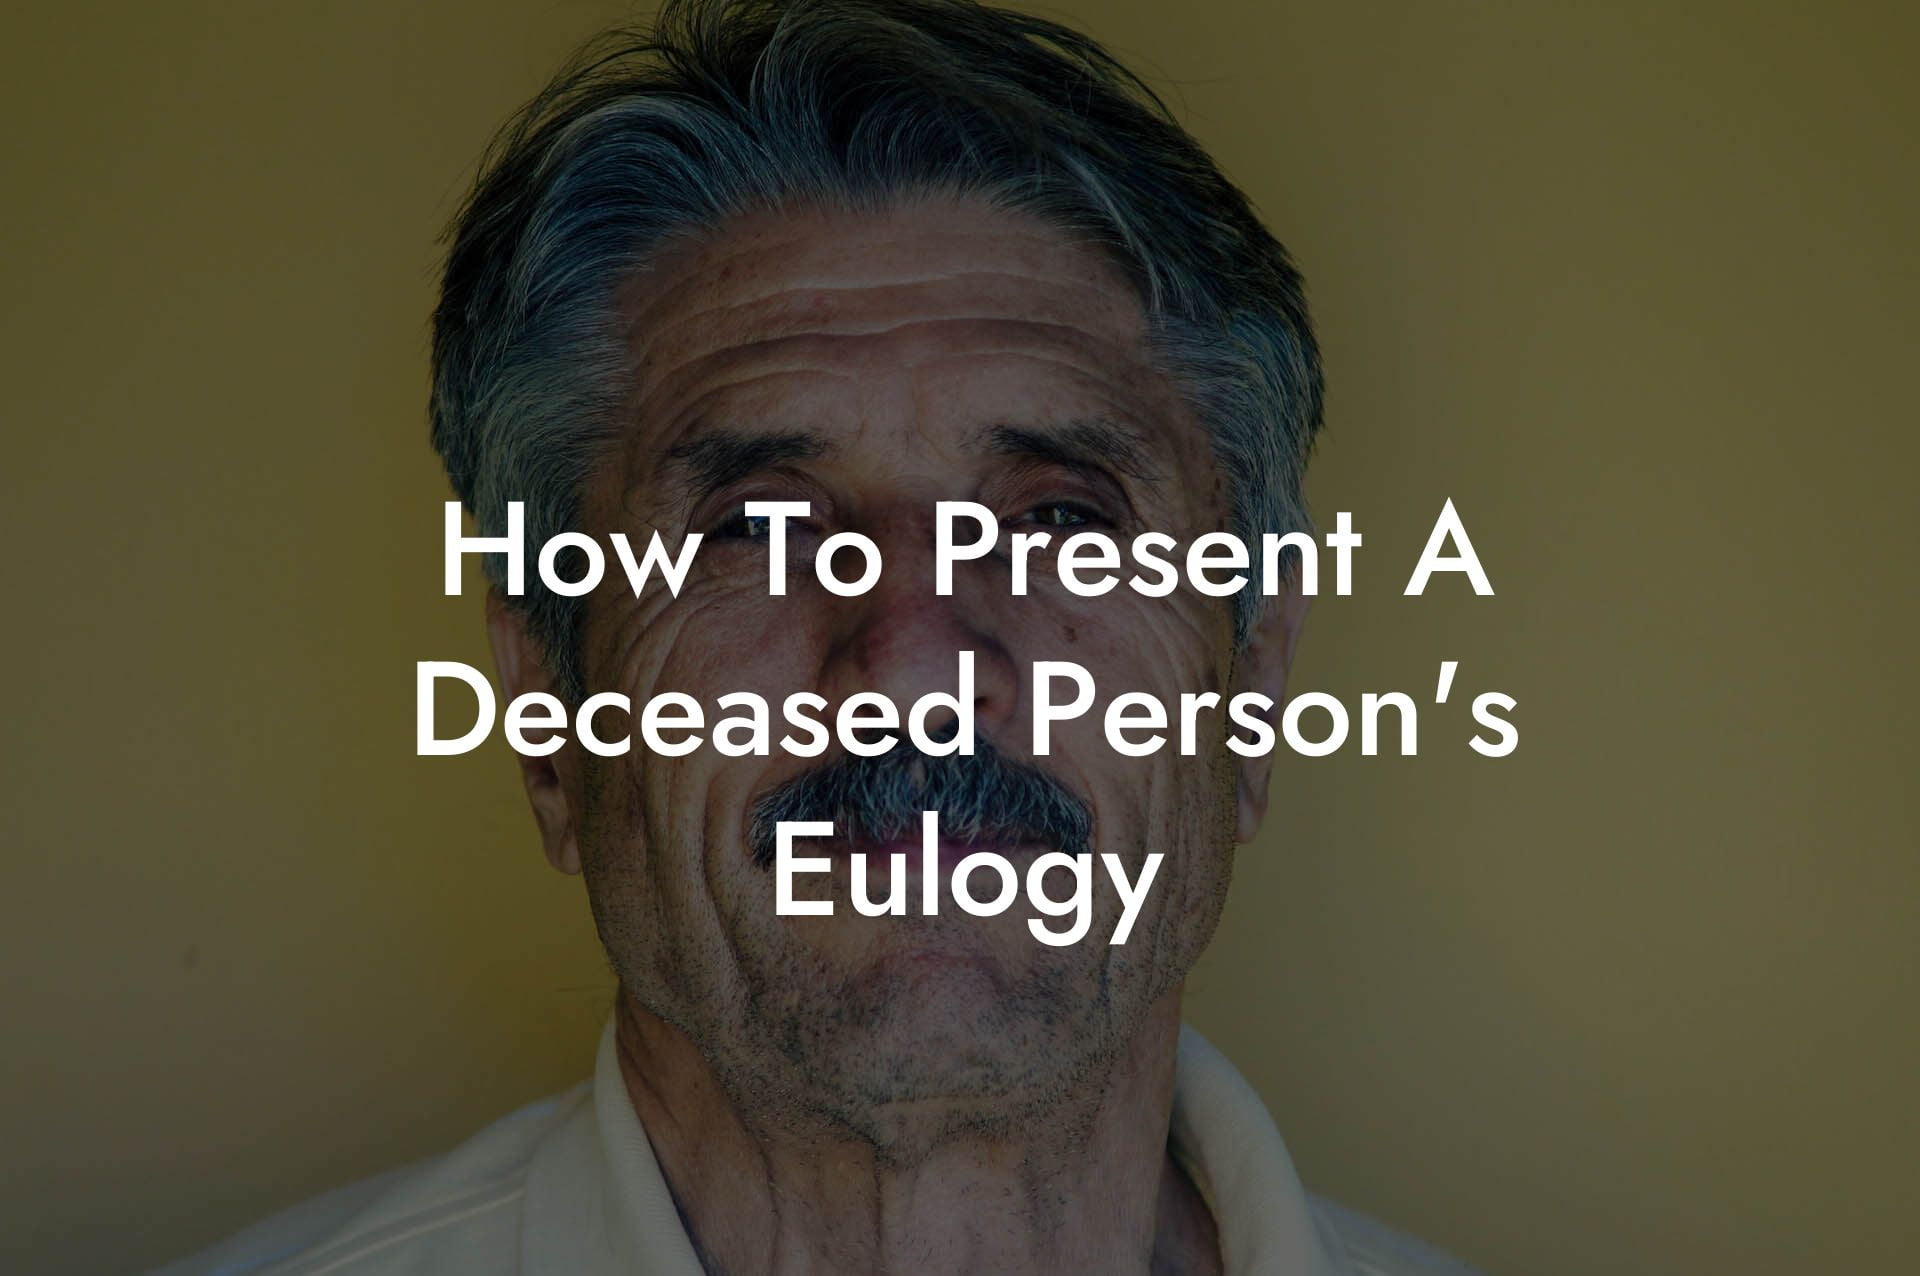 How To Present A Deceased Person's Eulogy